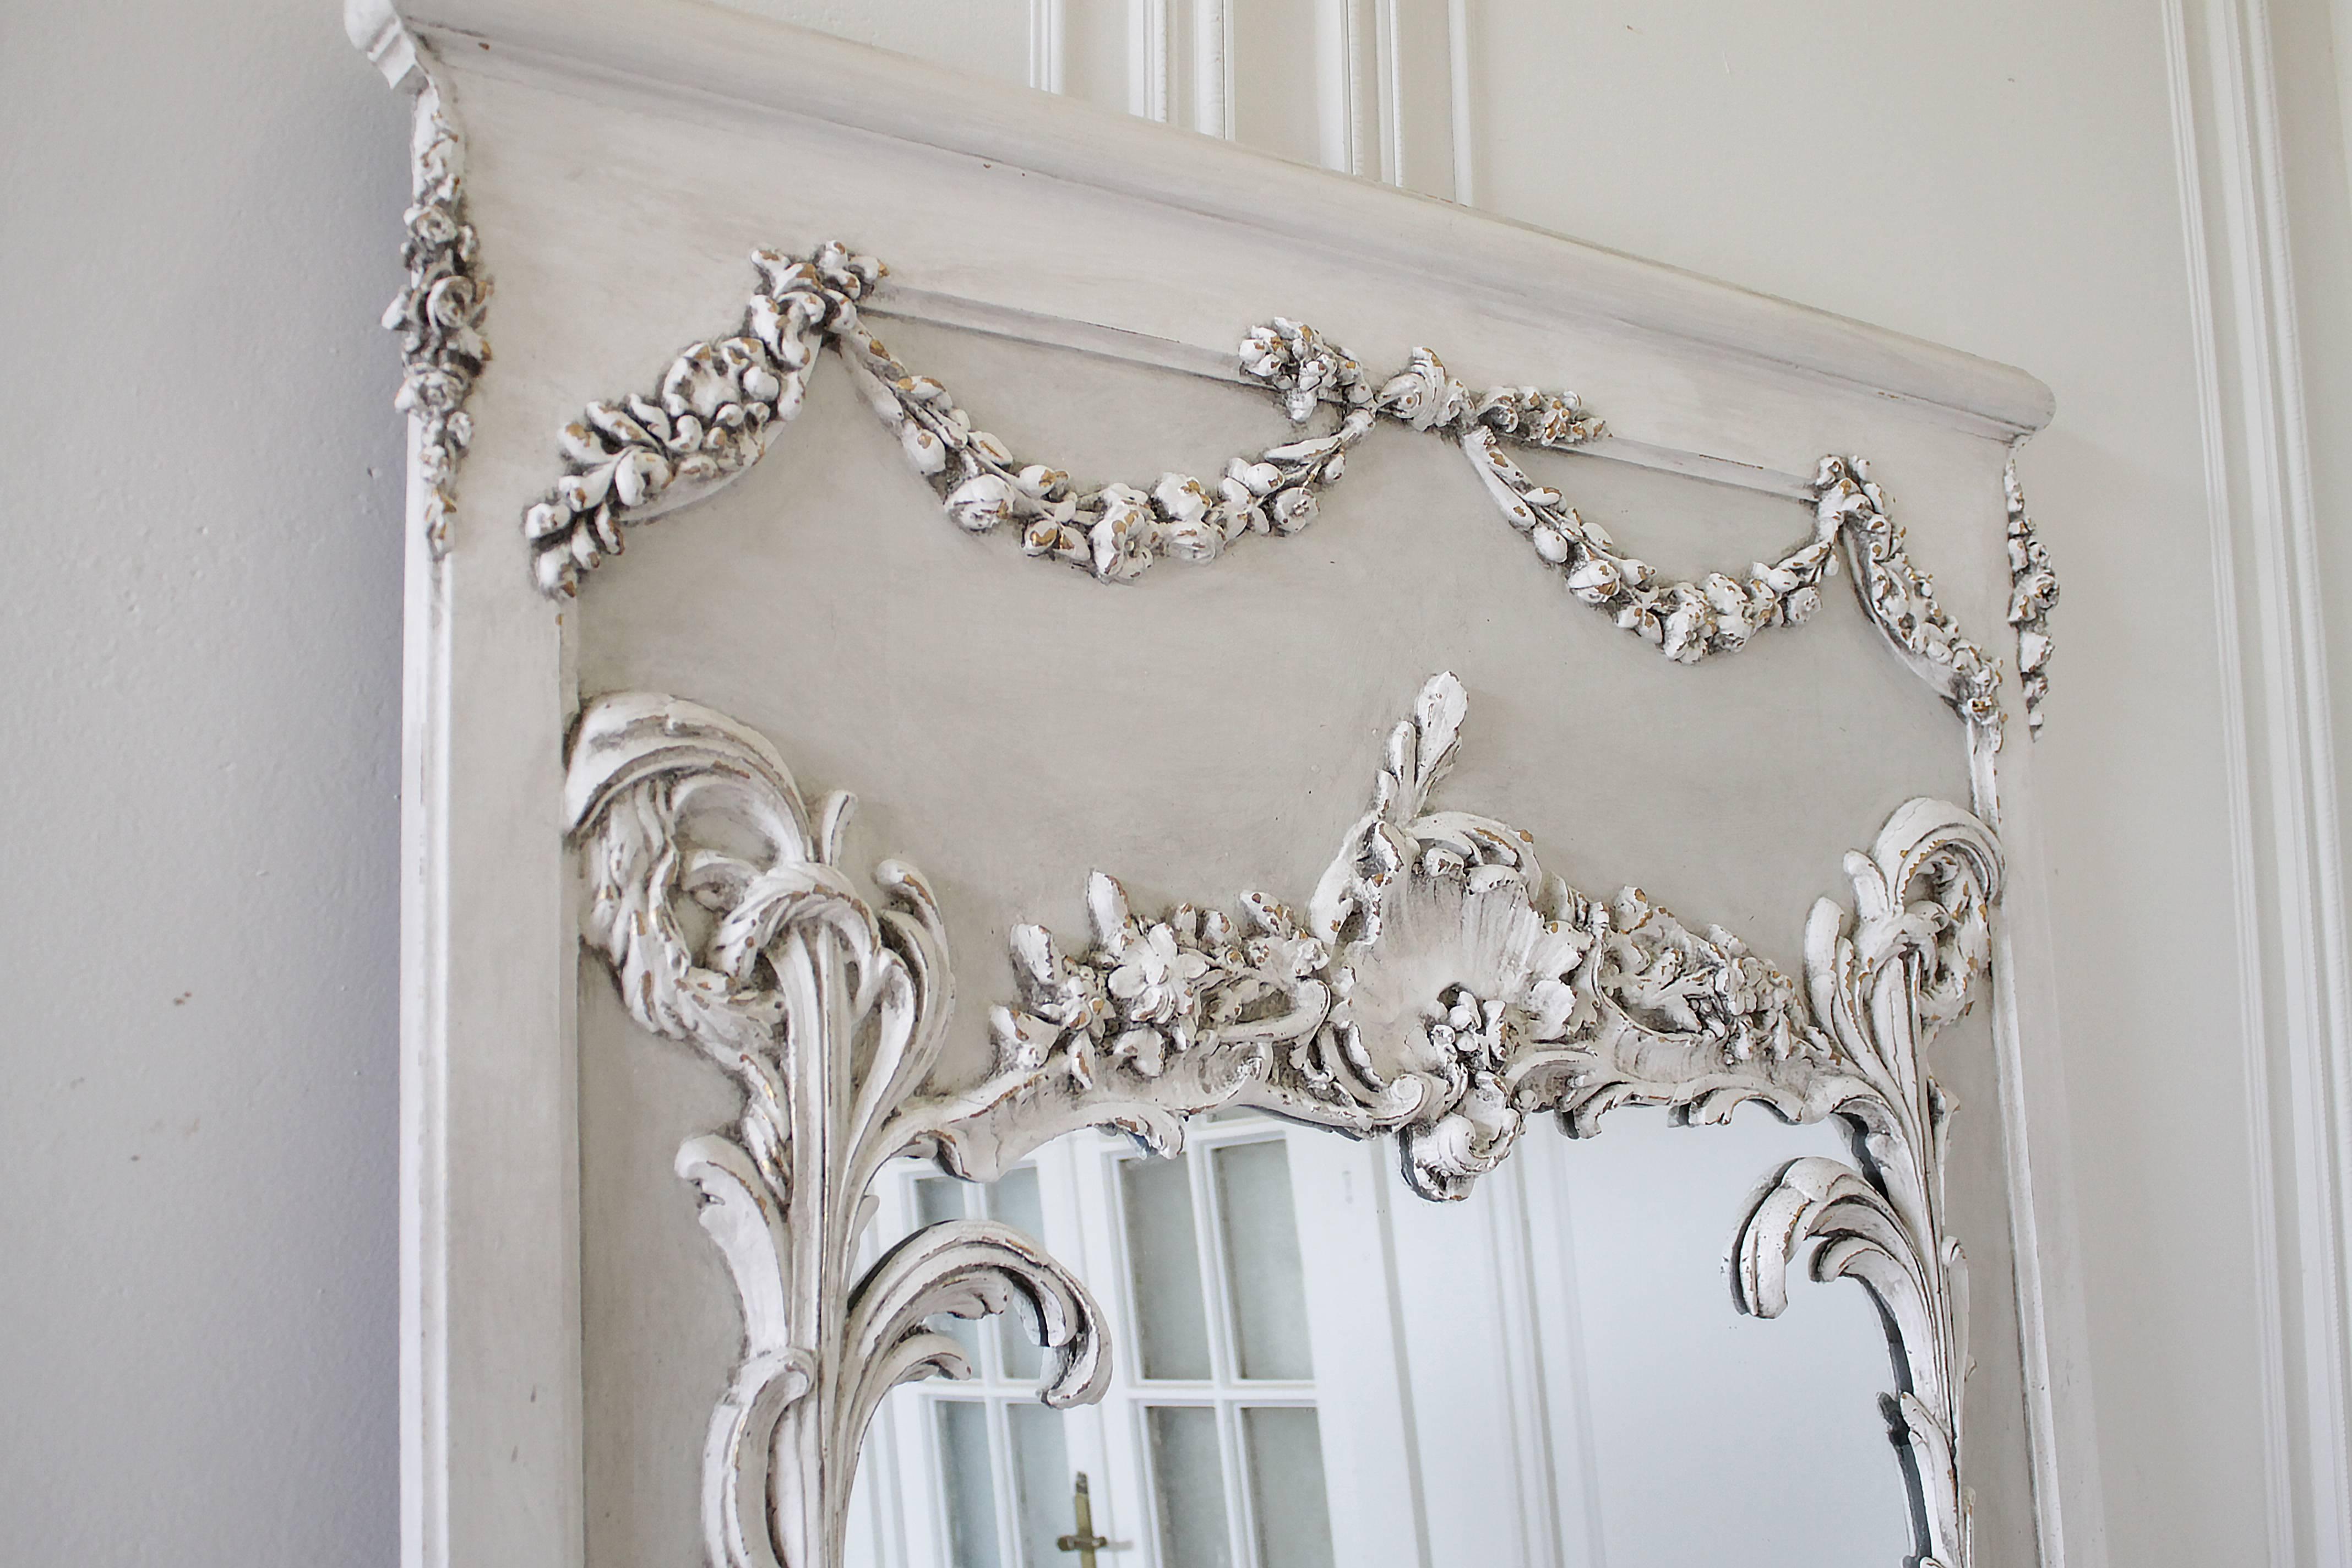 Fabulous pair of French mirrors with large carved cartouche, and floral swags, and trailing vines. Finished in our two-tone painted oyster white, with subtle distressing, and antique patina. Sold individually, these large trumeau mirrors are great